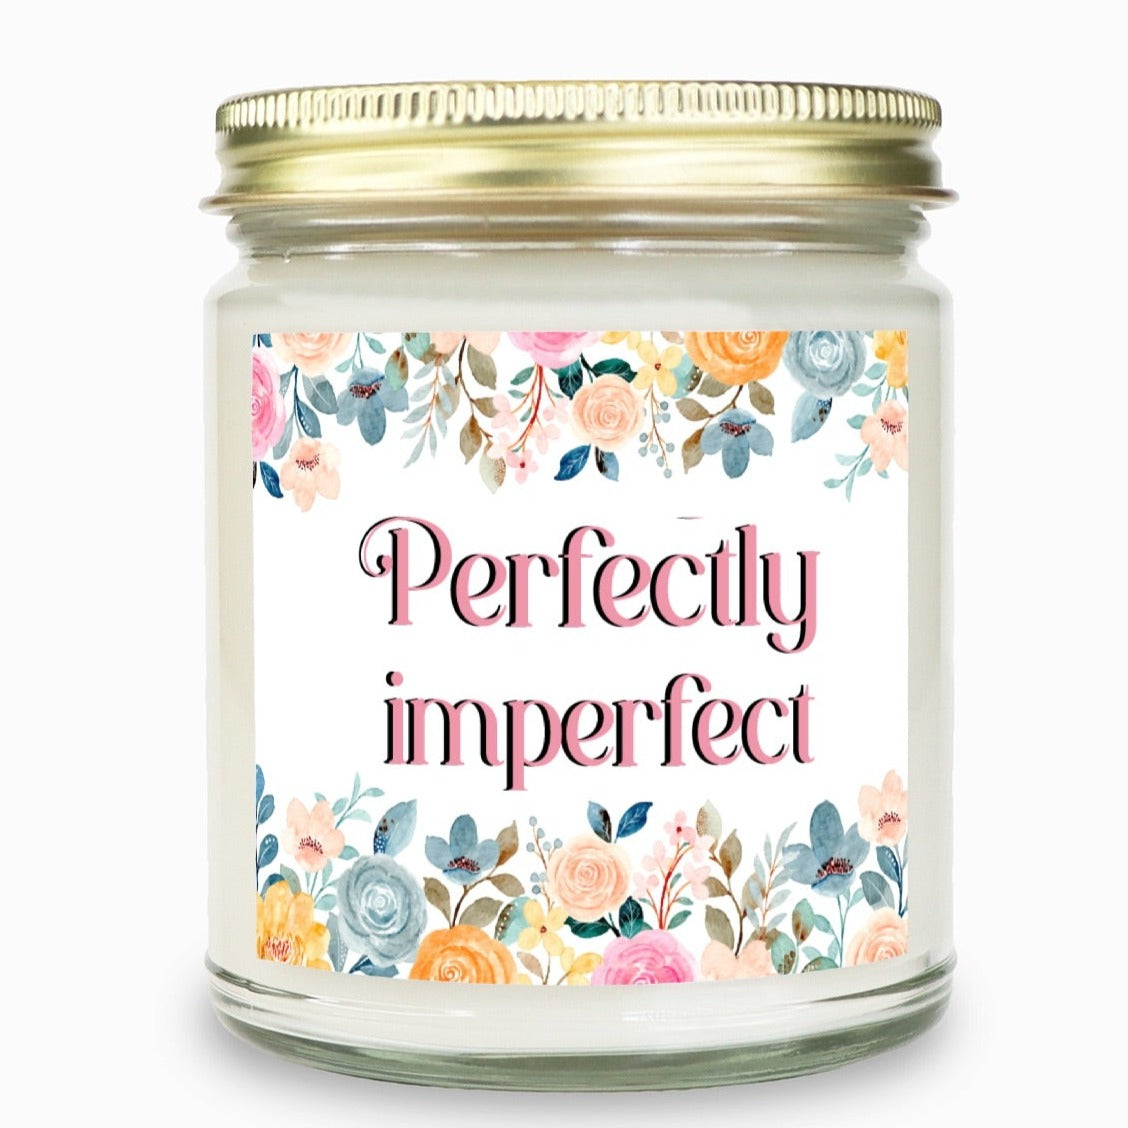 perfectly imperfect in pink font in center of candle label the top and bottom are filled with colorful flowers